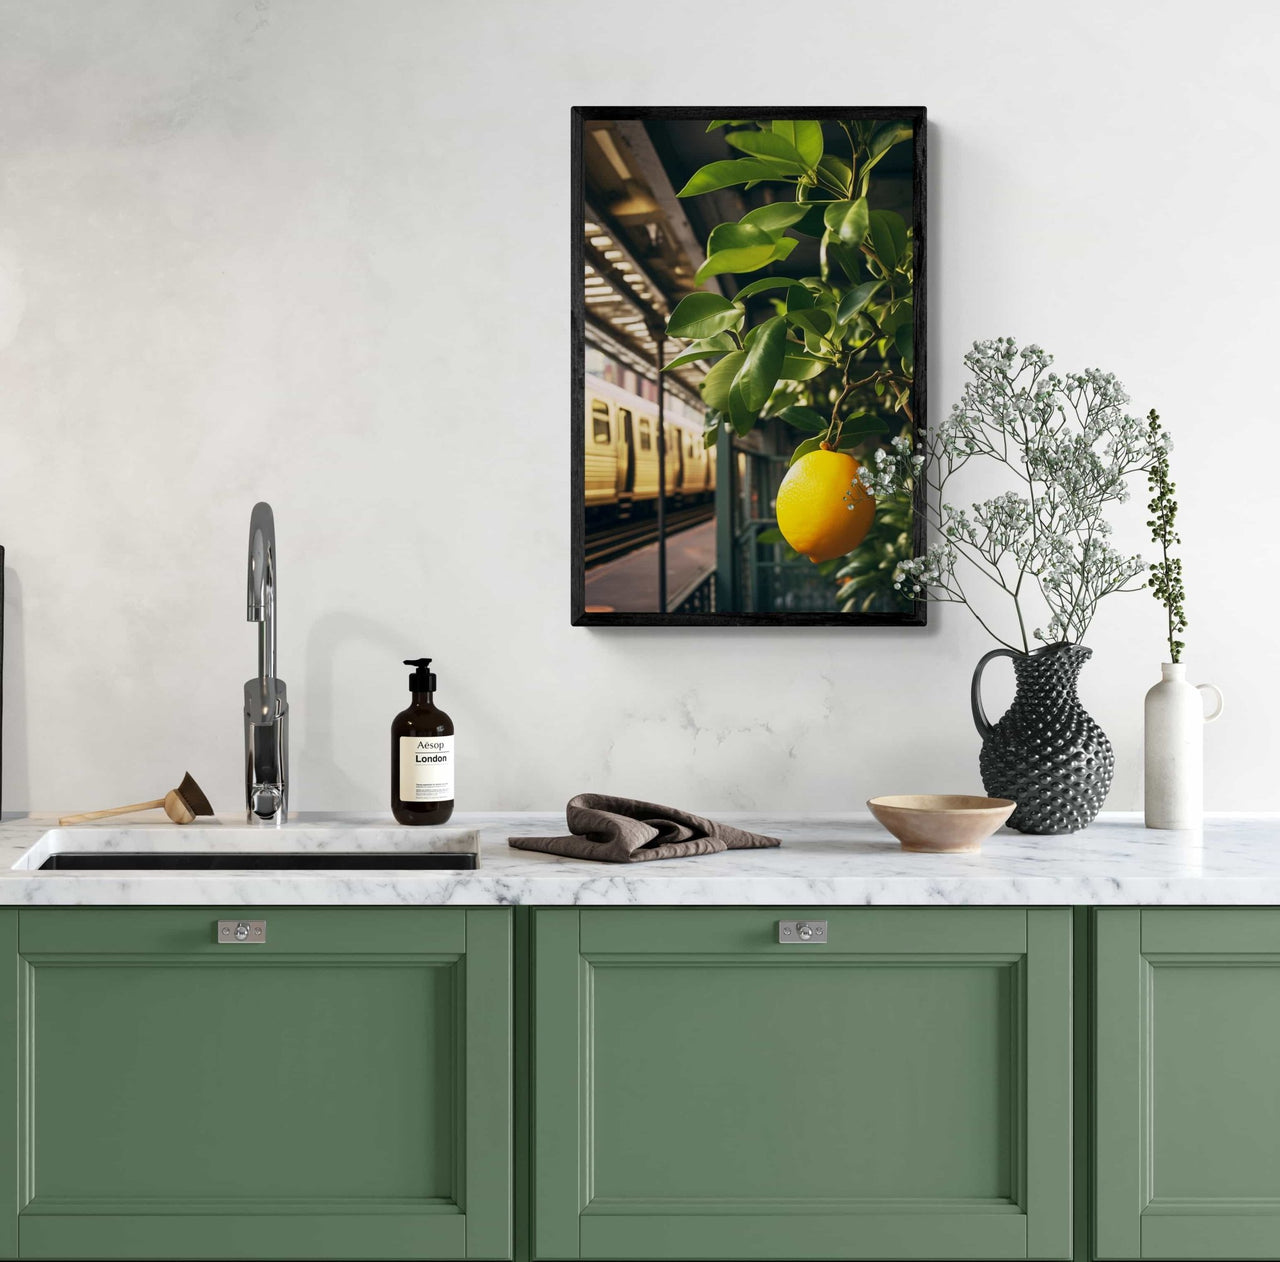 A framed poster print from Milton Wes Art, featuring a bright lemon on a tree branch with a subway train in the background, hung on a kitchen wall, adding a fresh and urban vibe to the culinary space.